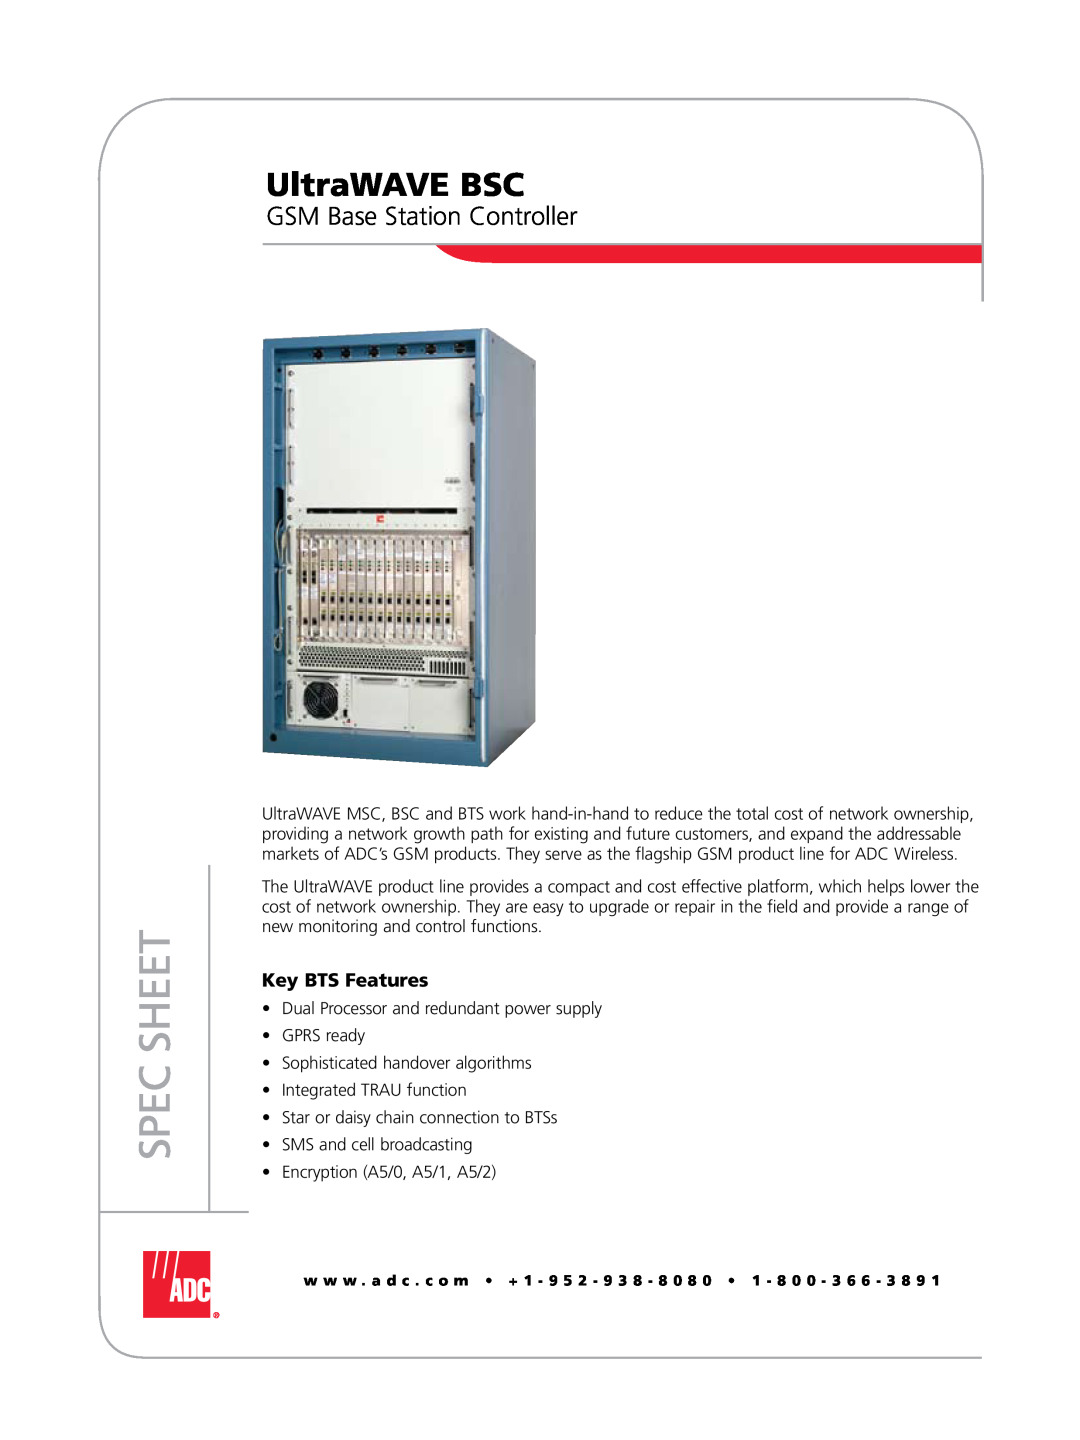 ADC UltraWAVE BSC manual GSM Base Station Controller, Spec Sheet, Key BTS Features 